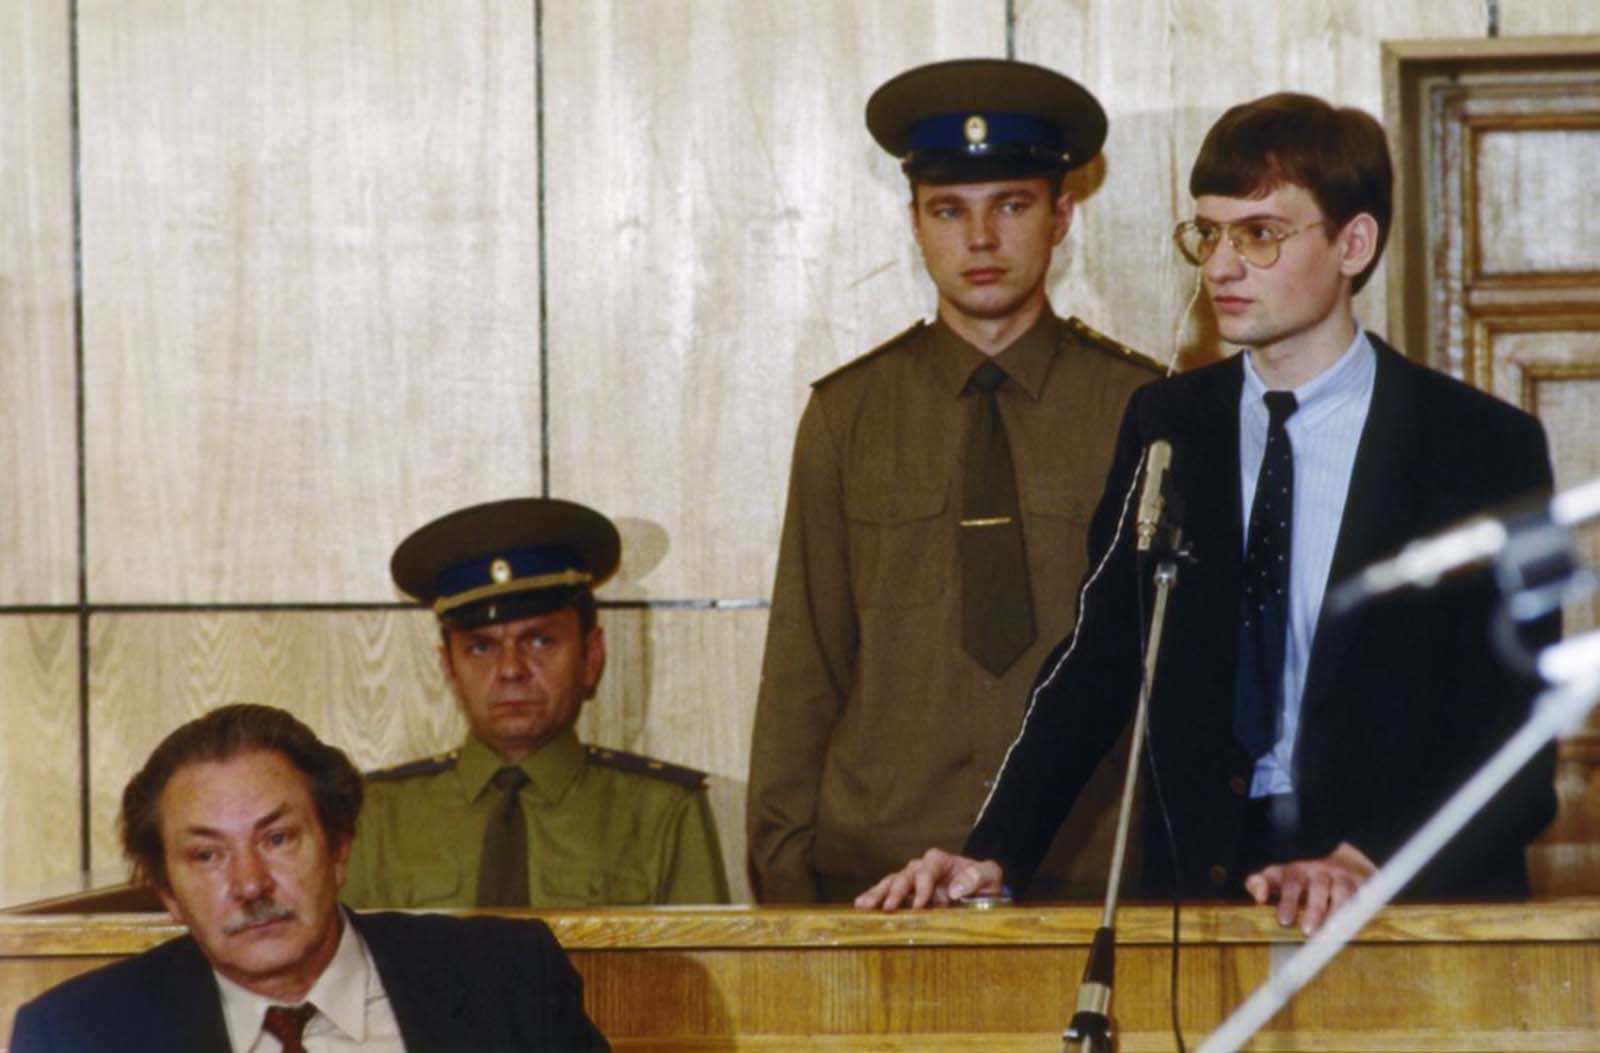 Mathias Rust on trial for invading Soviet air space.